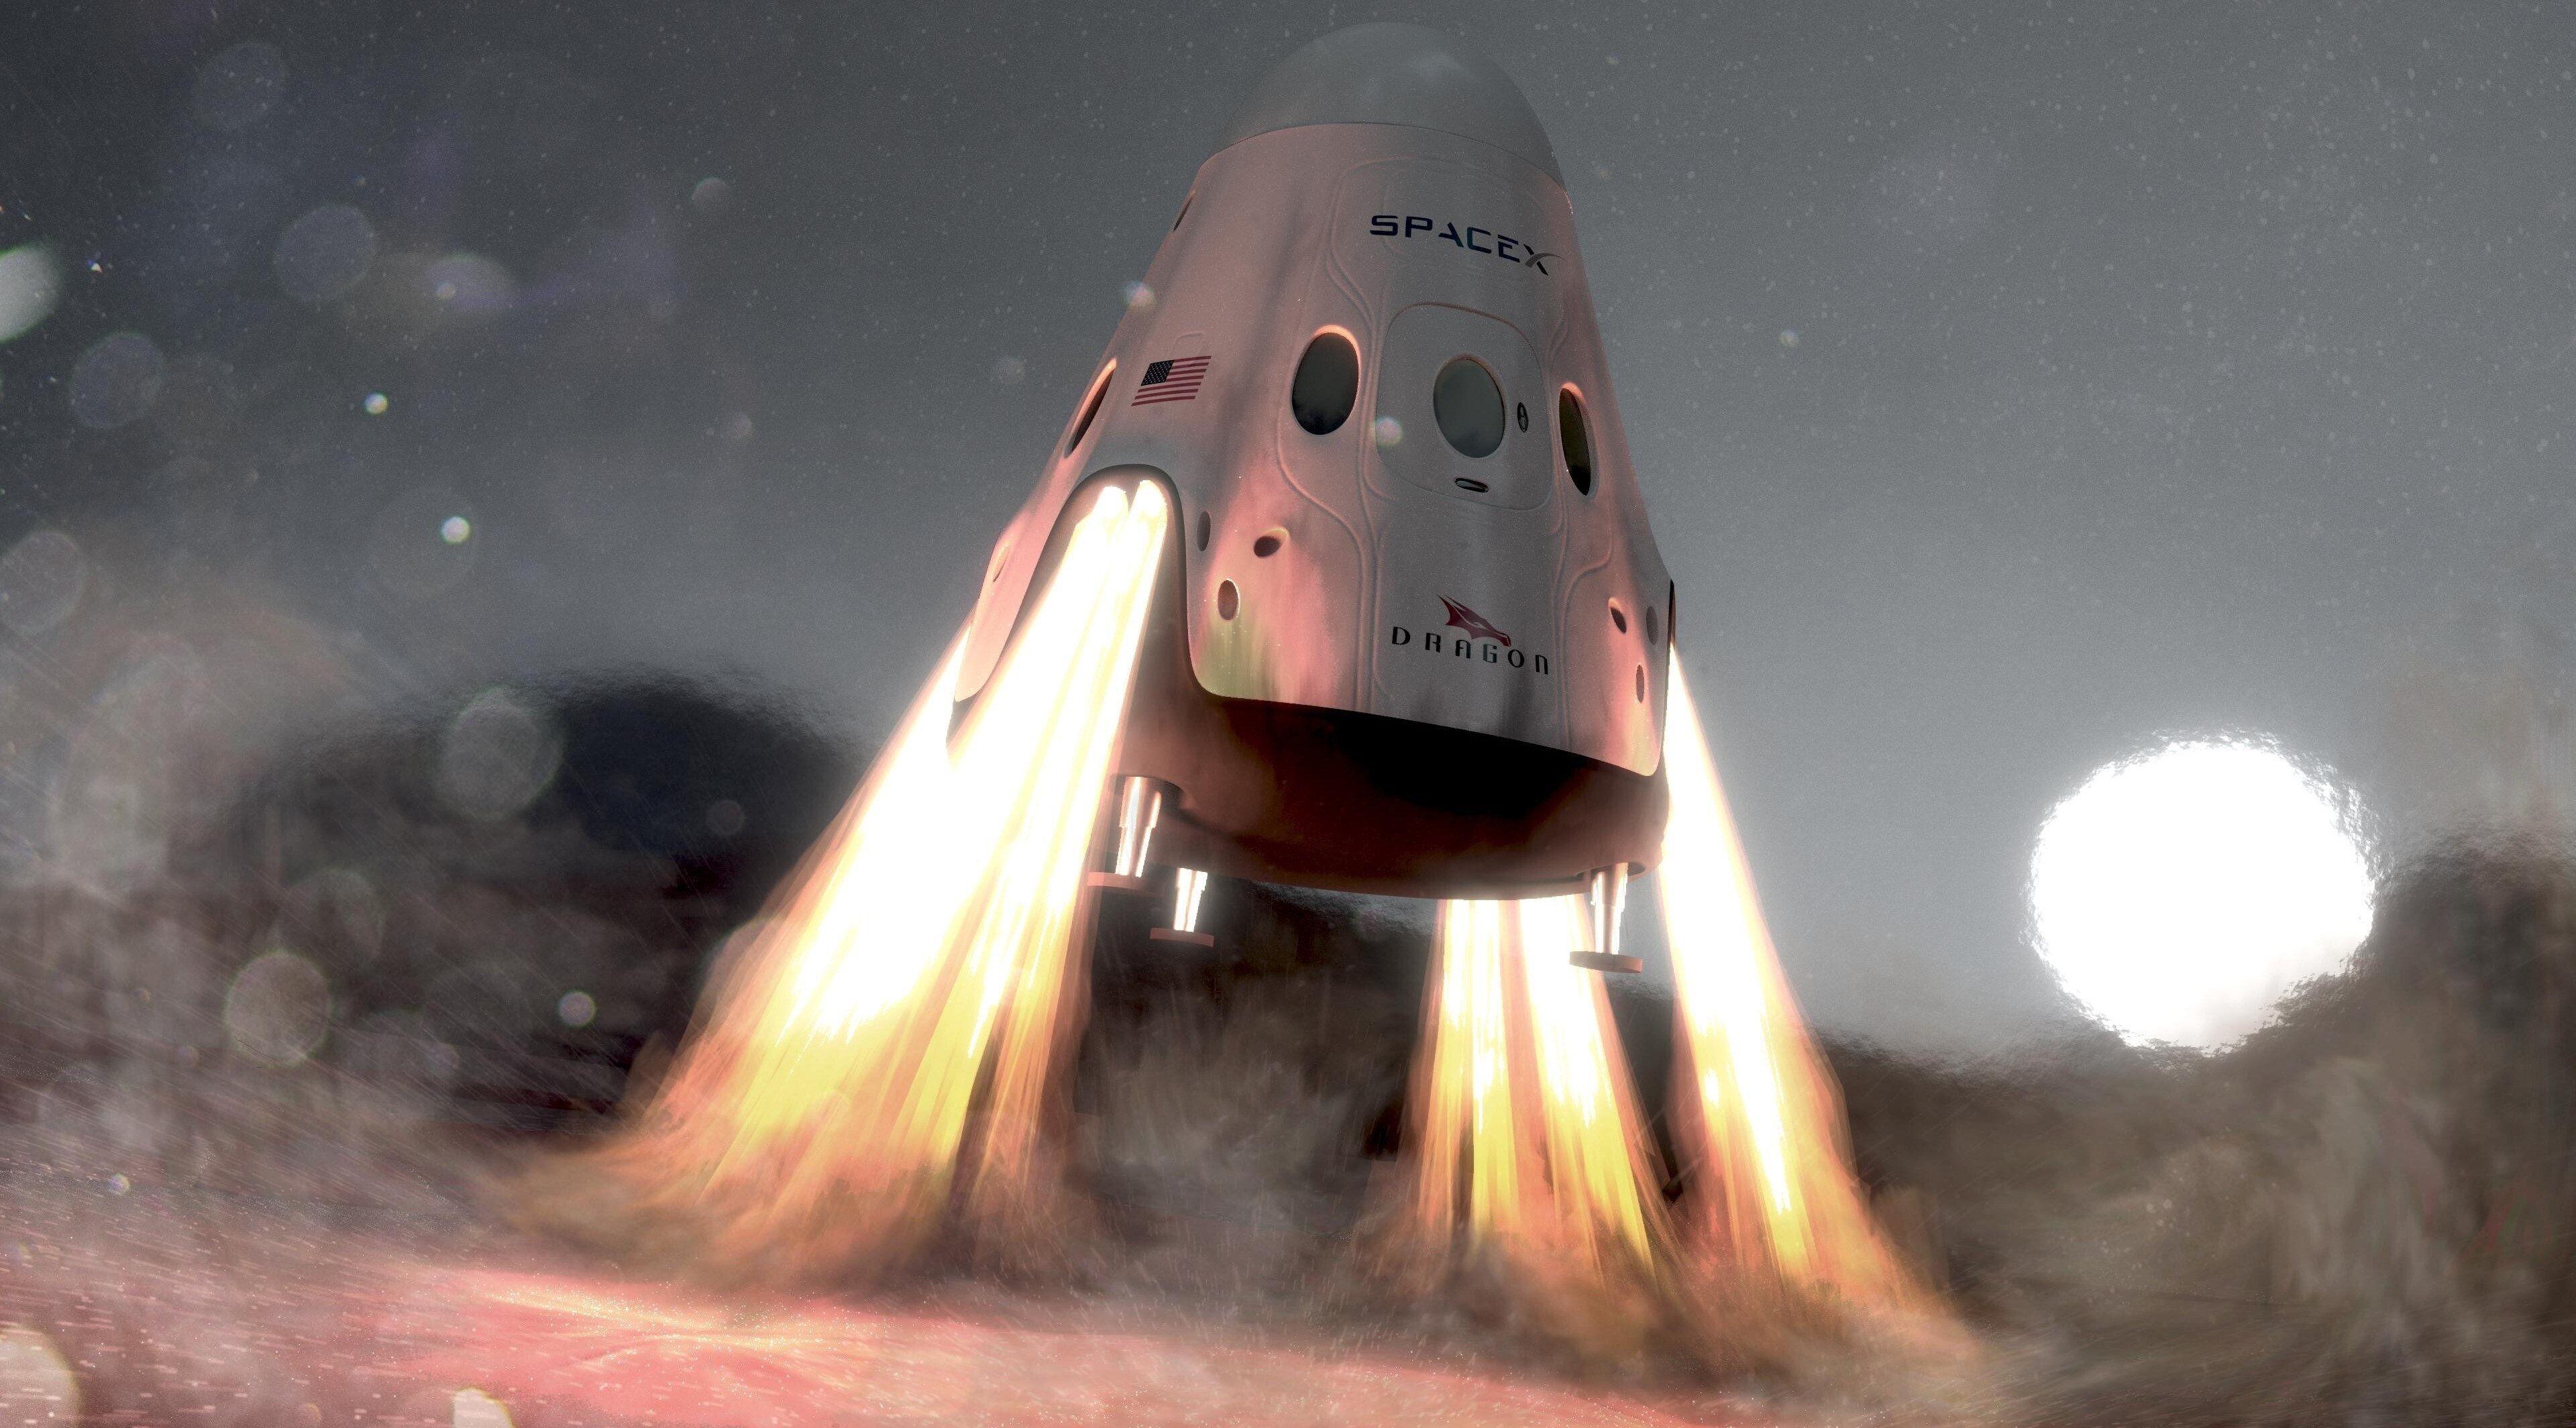 Spacex 4k Wallpaper Puter Space Shuttle